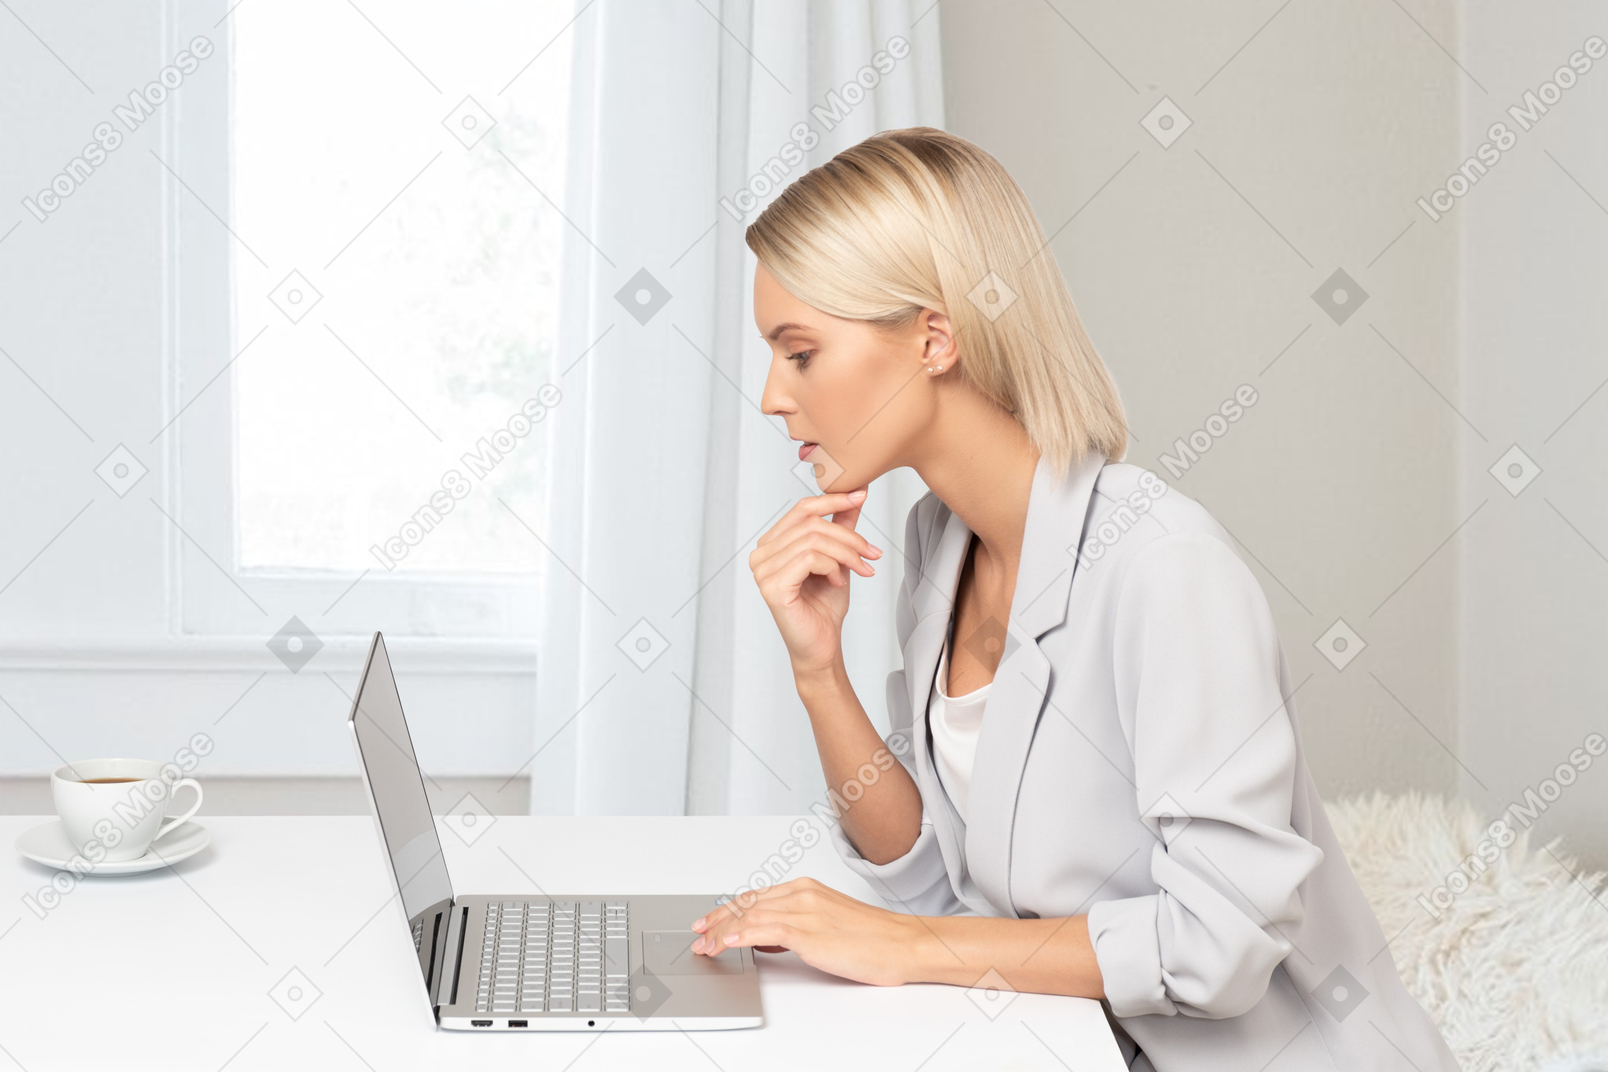 A woman sitting in front of a laptop computer